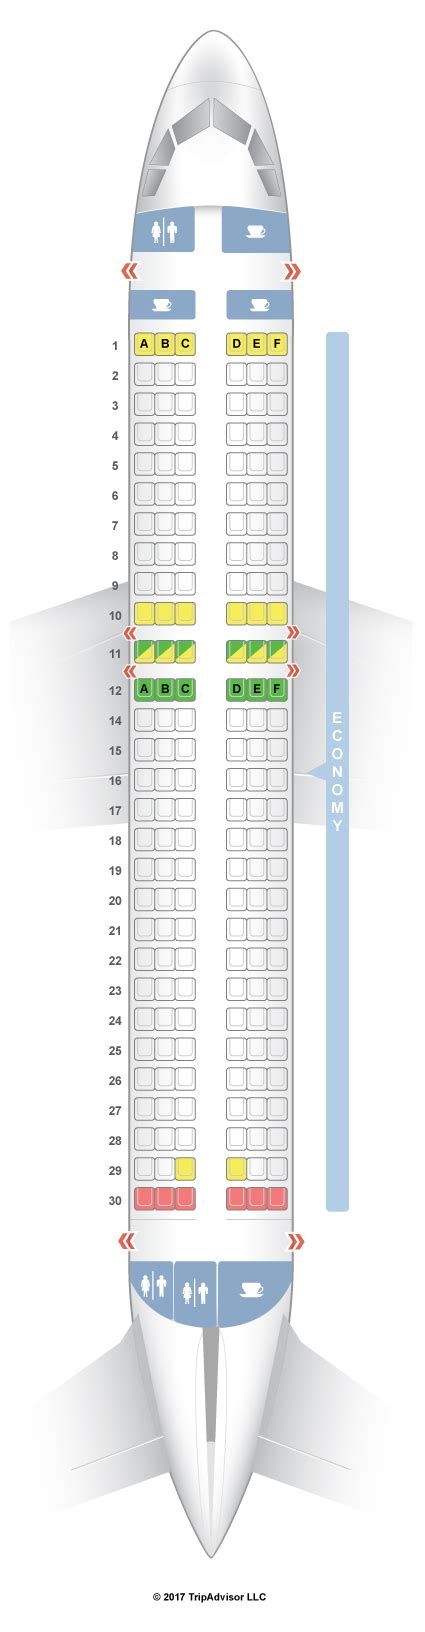 Lufthansa Seat Map A320 Awesome Home